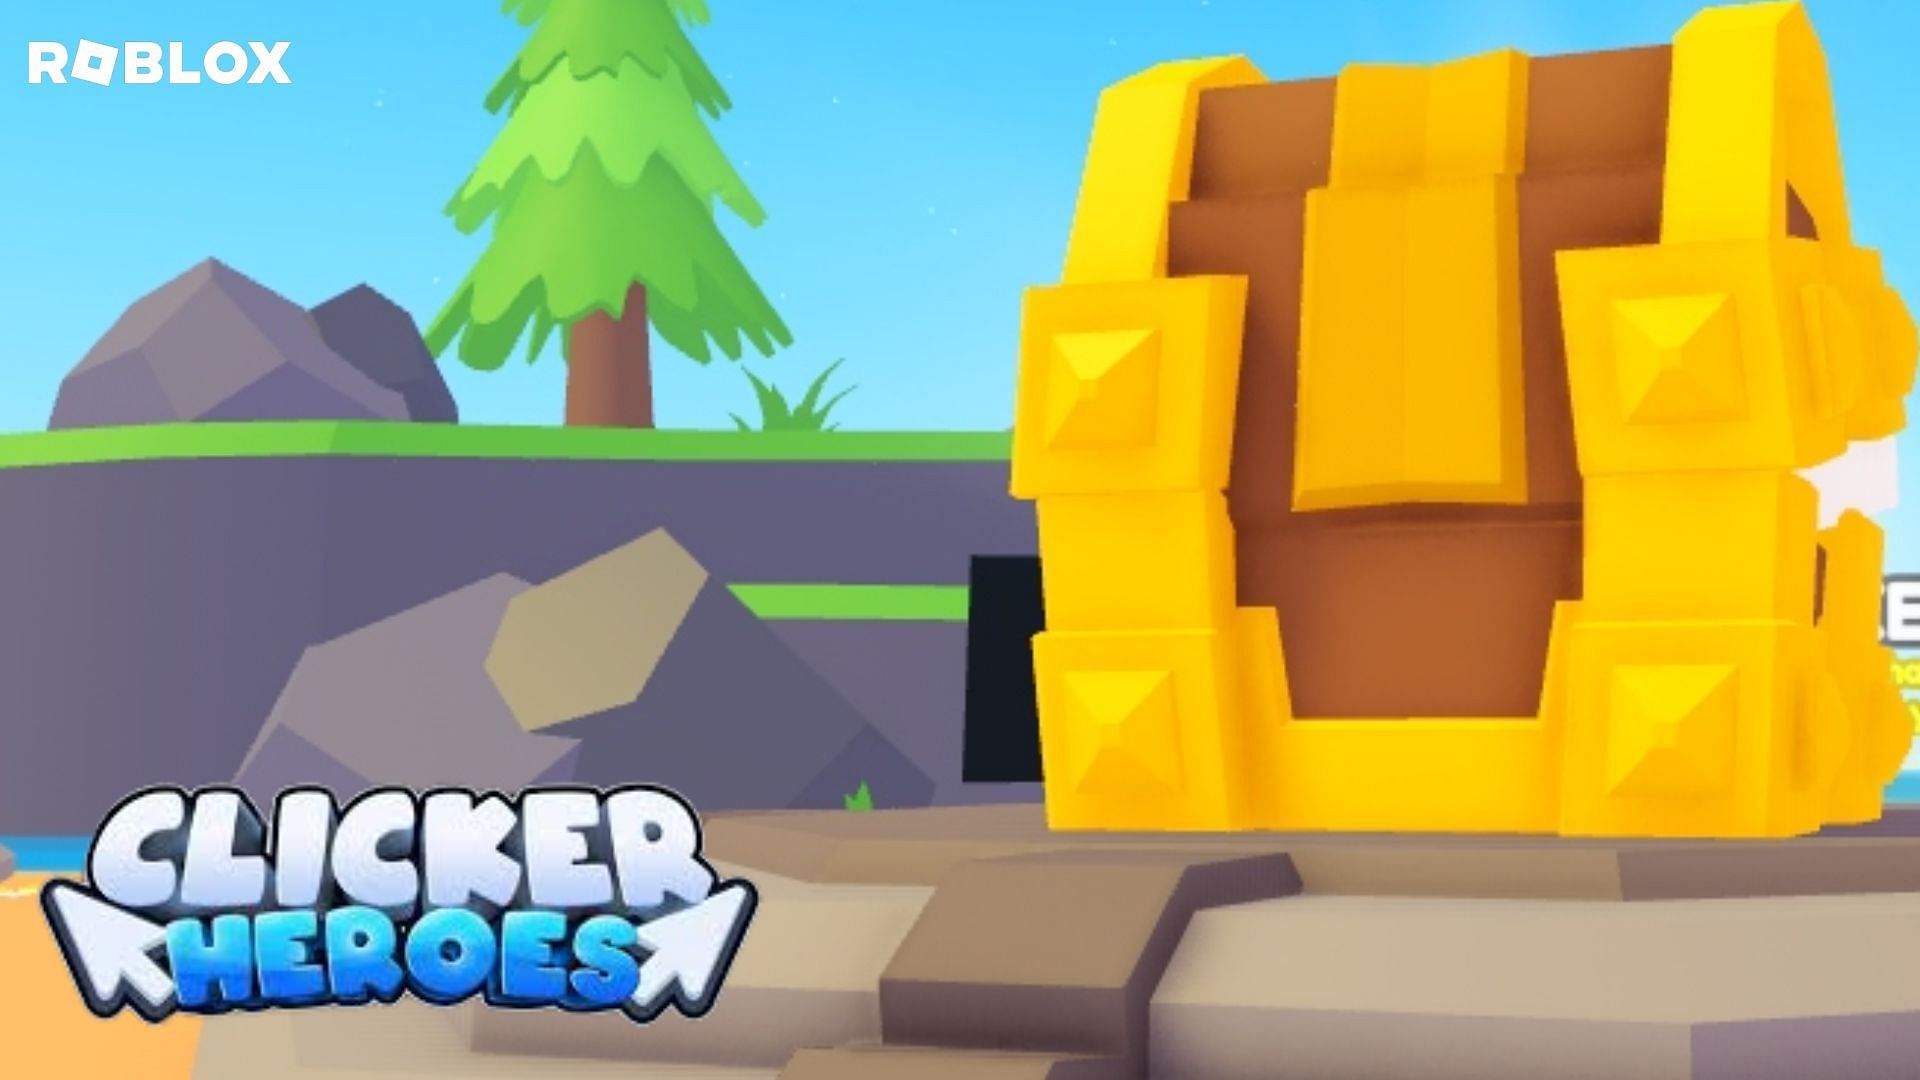 Check out the latest codes for Clicker Heroes (Image via Roblox)